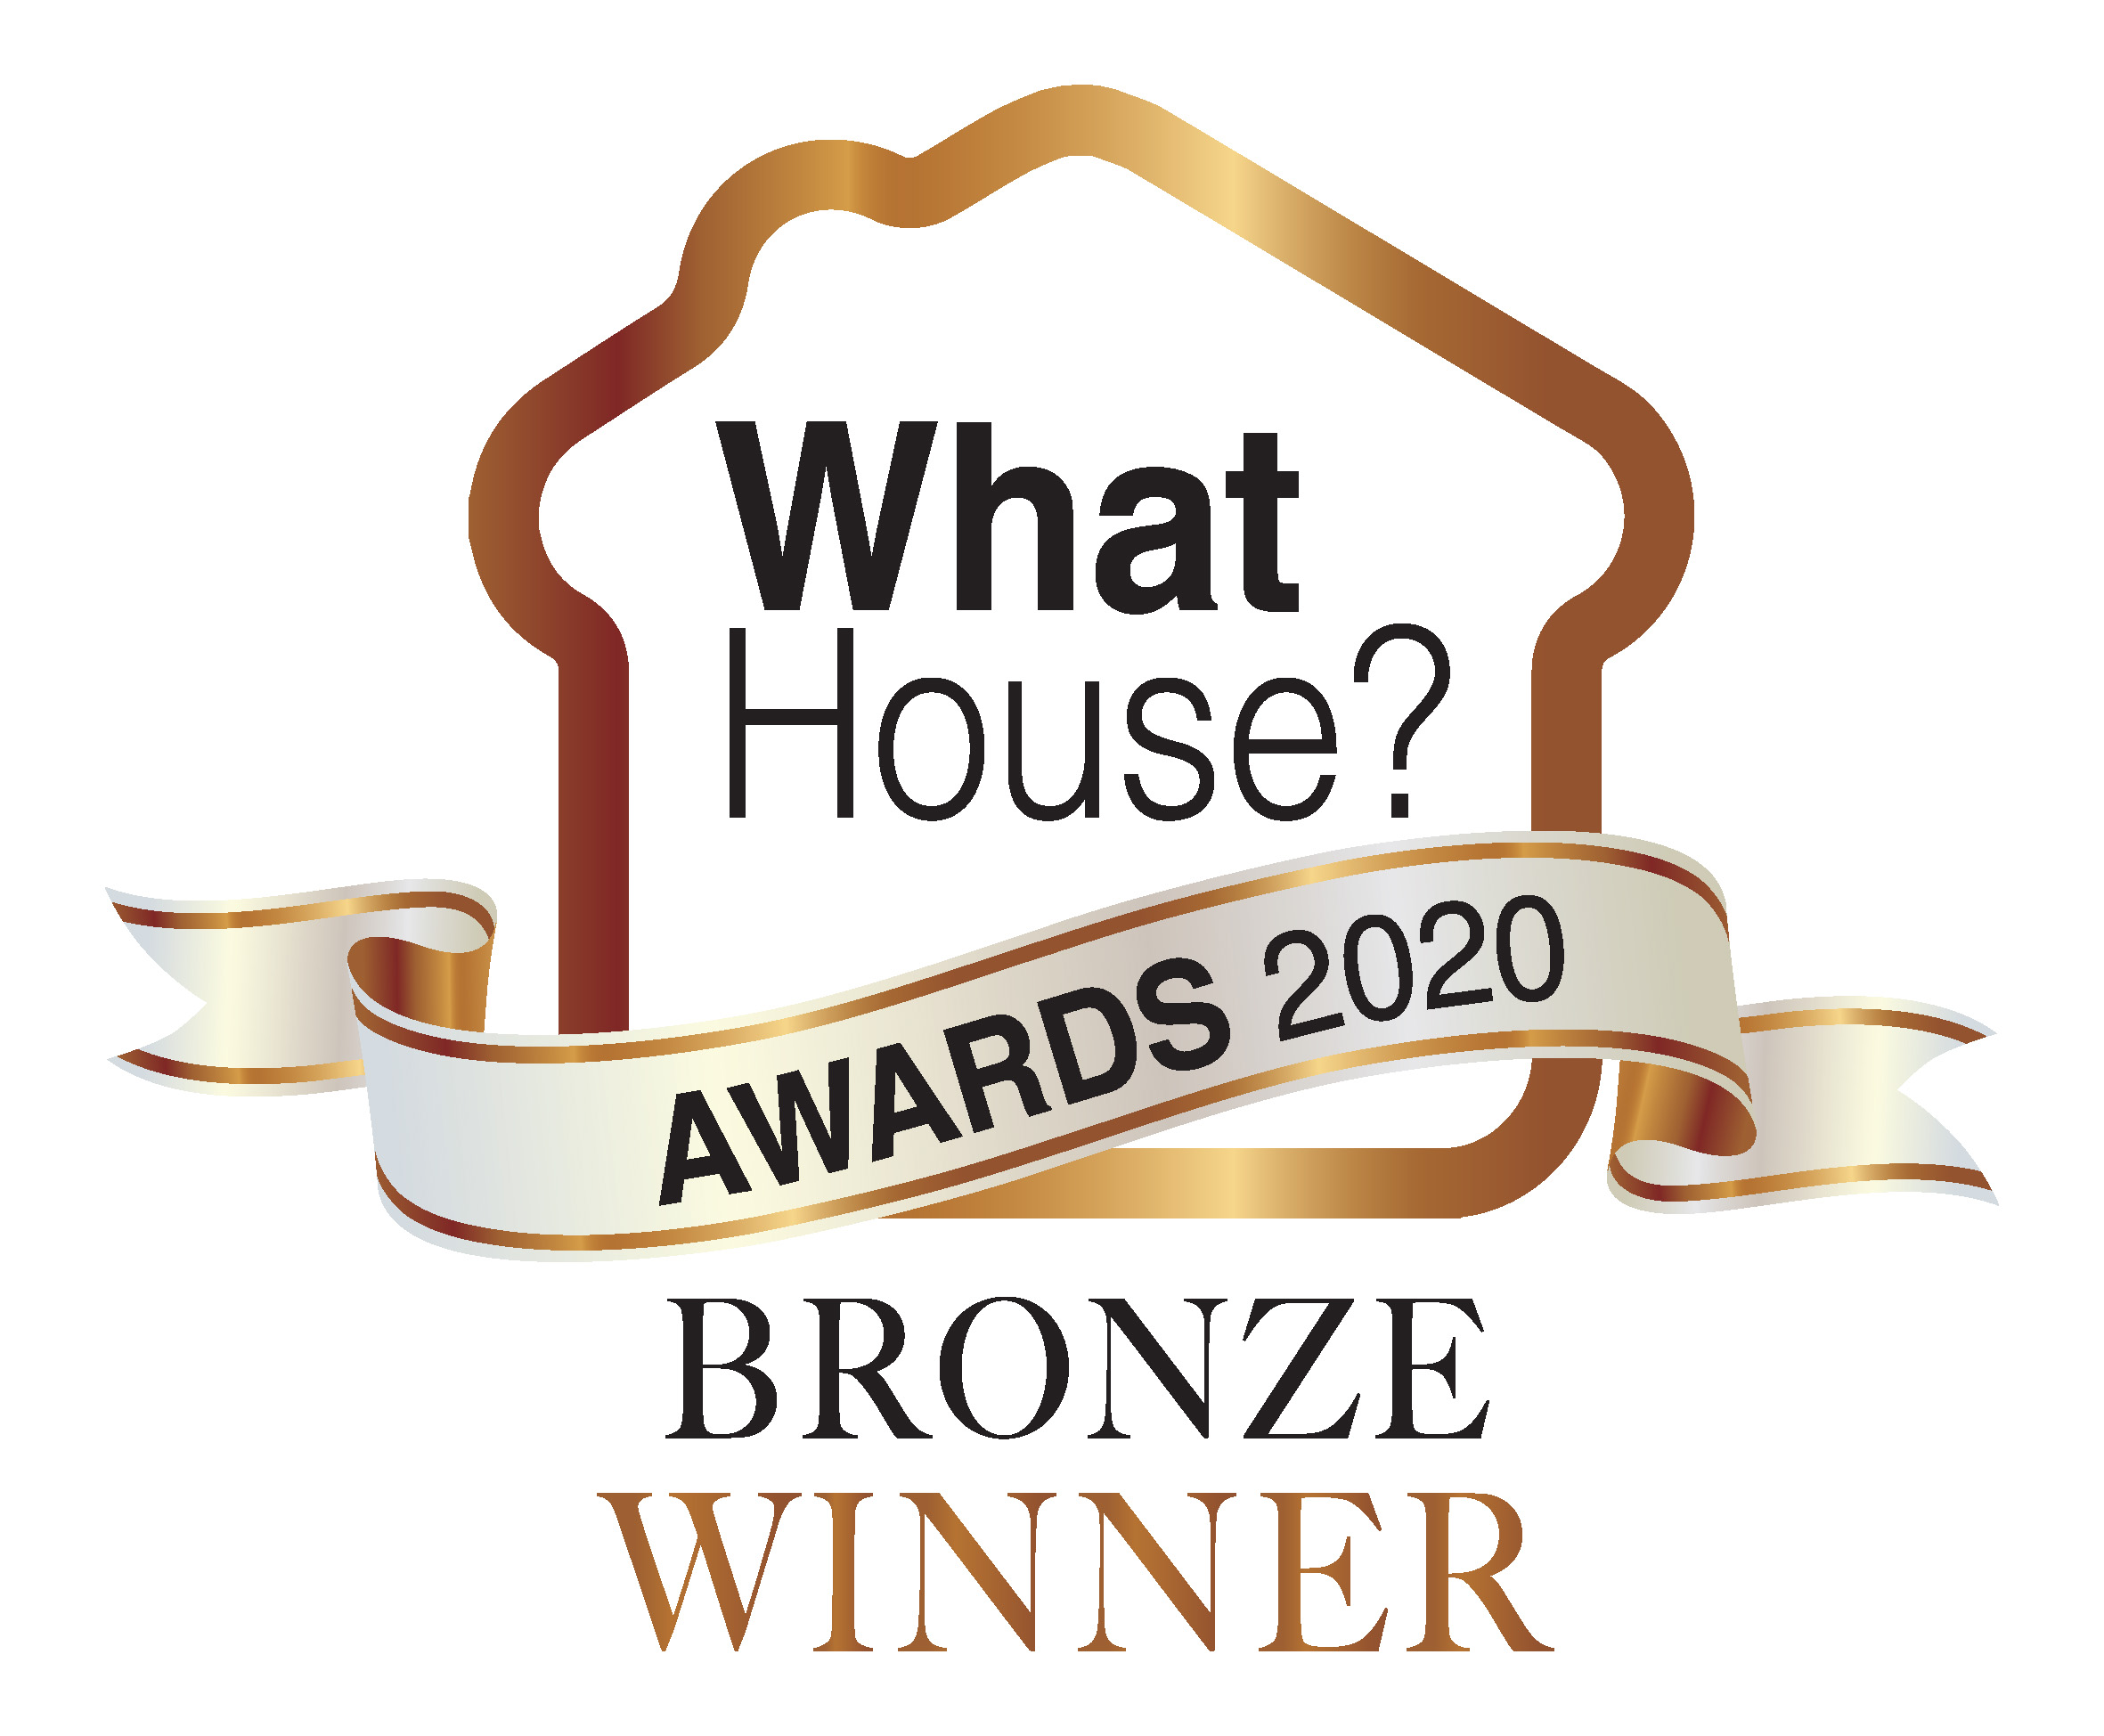 Won bronze for Best Renovation at the Whathouse? Awards 